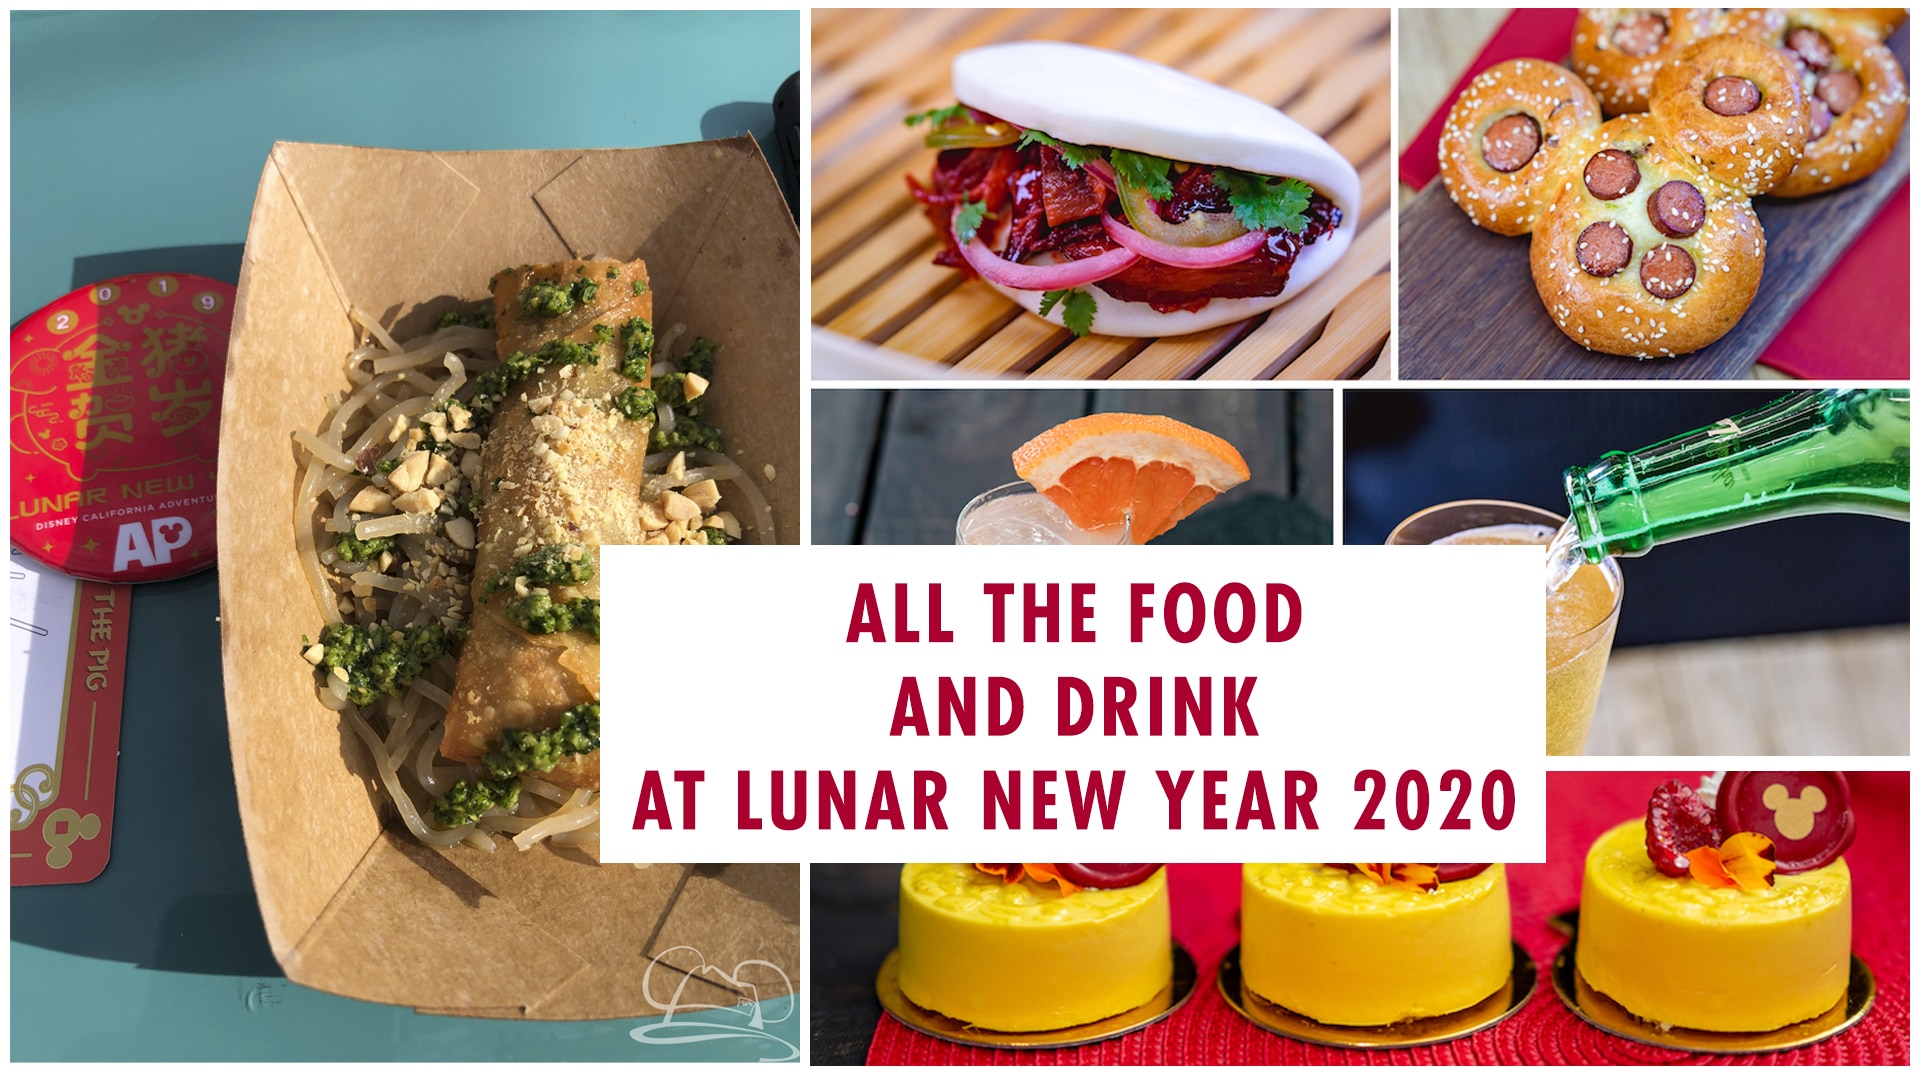 Guide to Food and Drink at Lunar New Year in Disney California